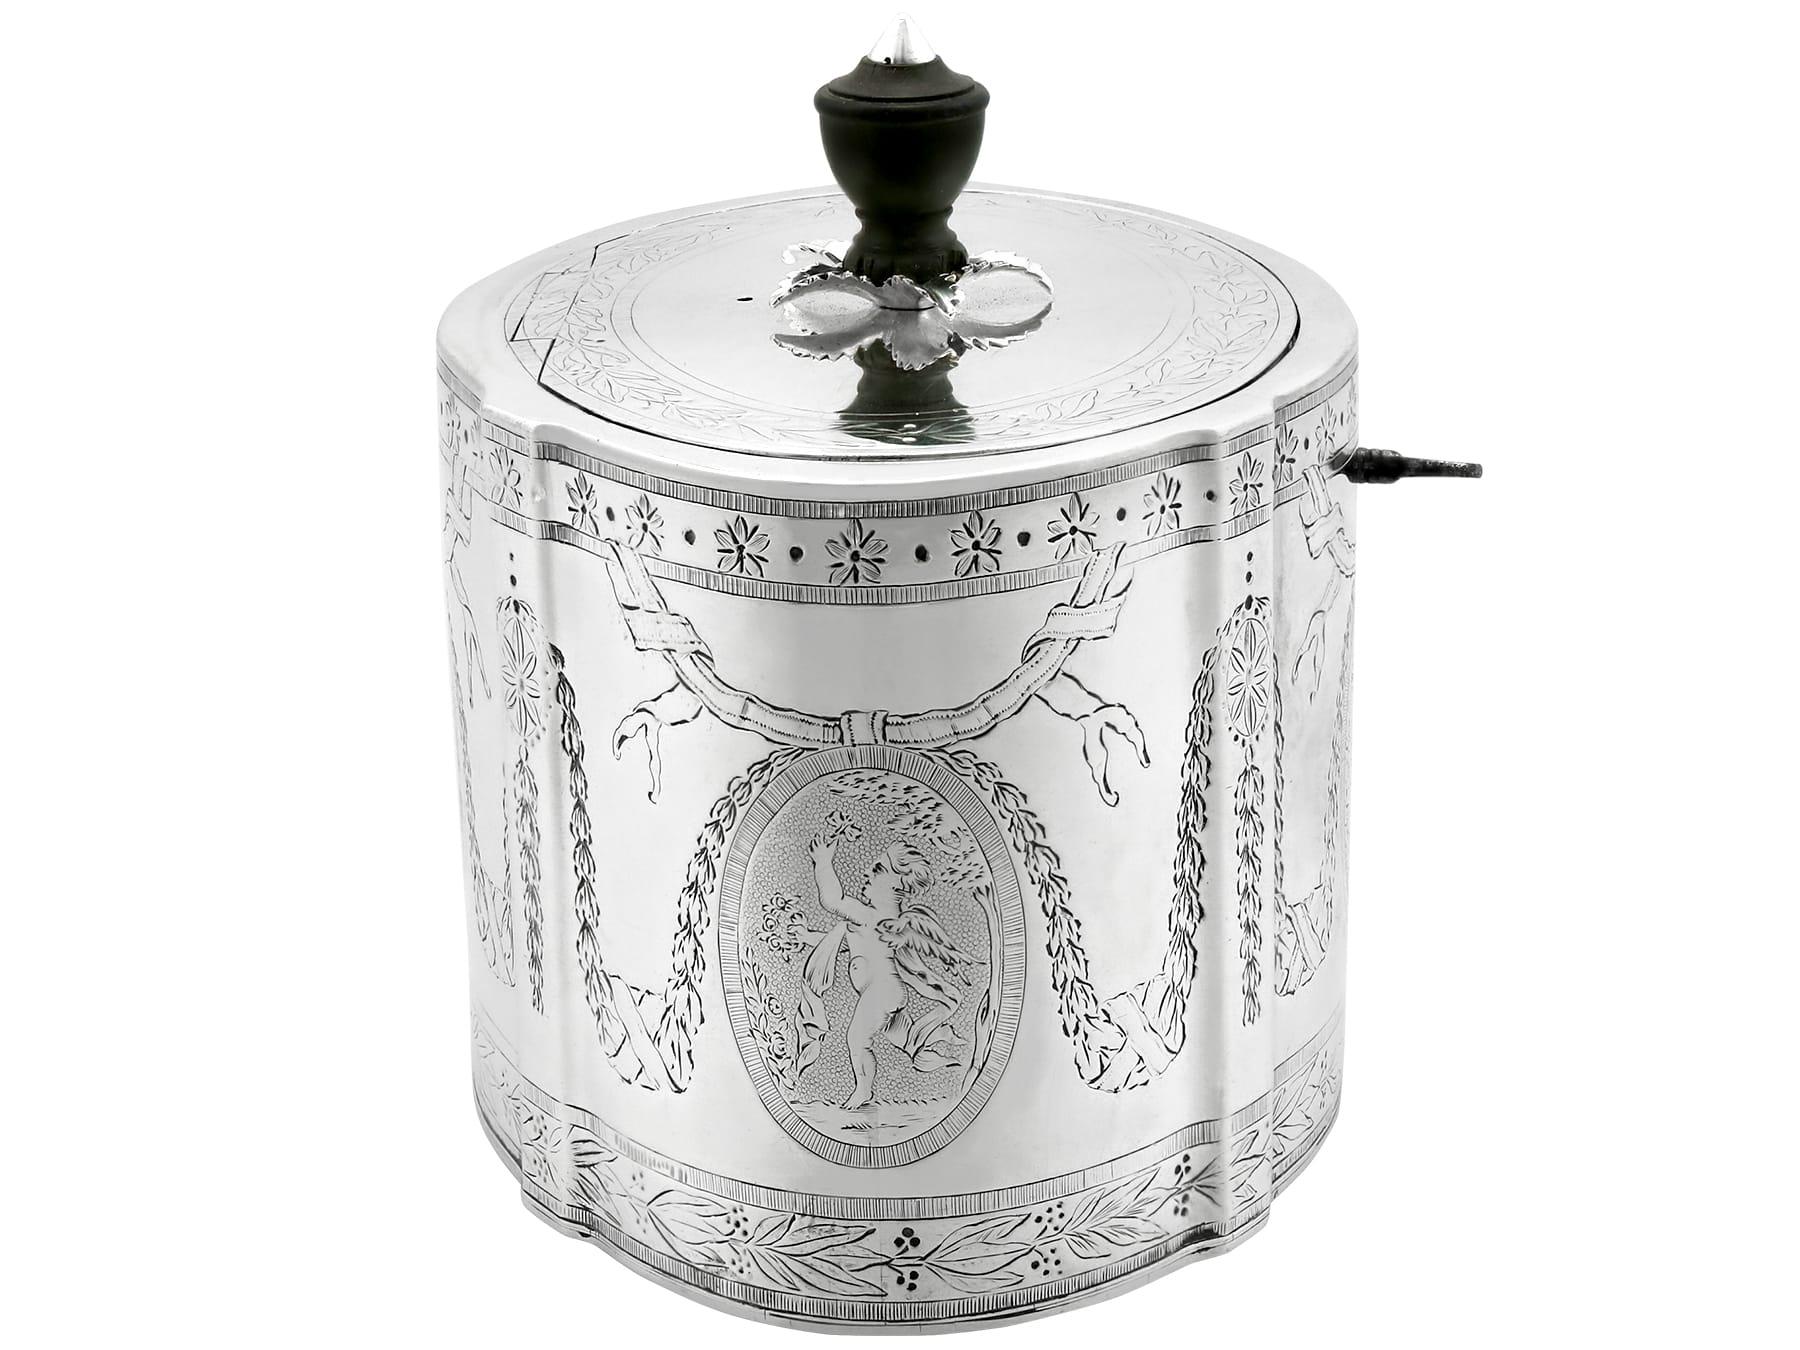 Late 18th Century Antique George III Sterling Silver Locking Tea Caddy (1783) For Sale